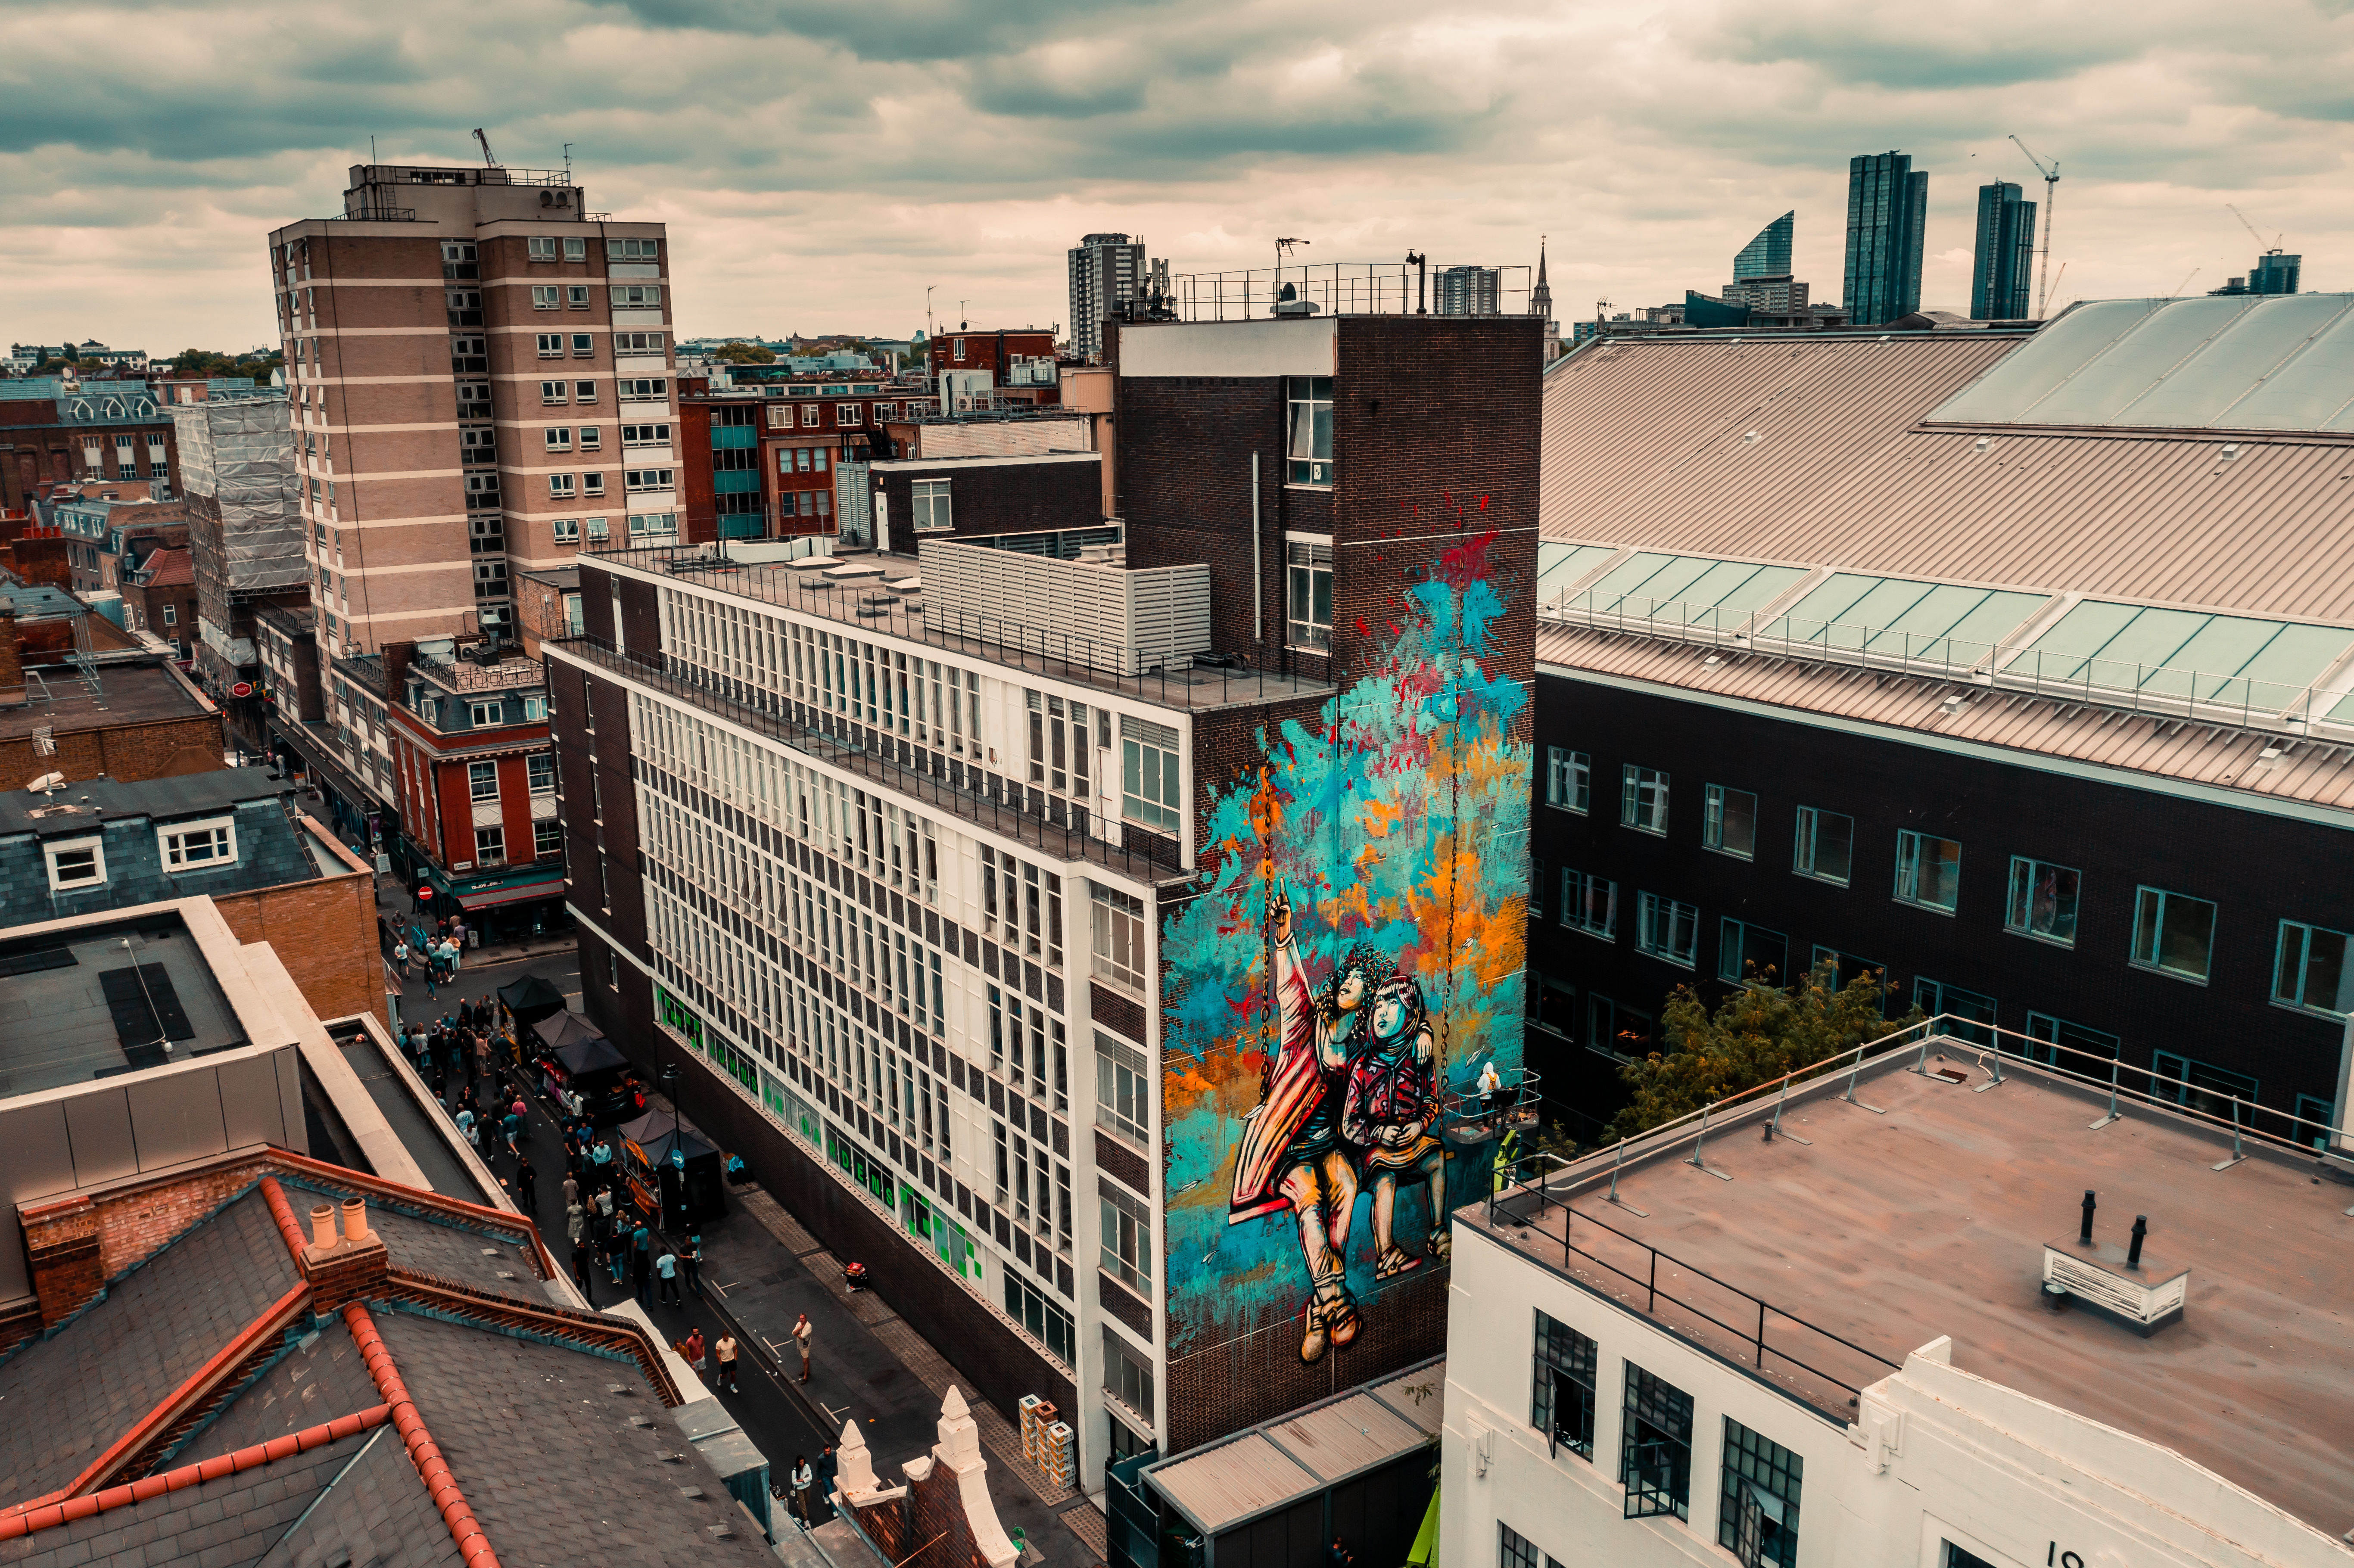 The Generation Equality Mural in London marks the first year of the Global Acceleration Plan